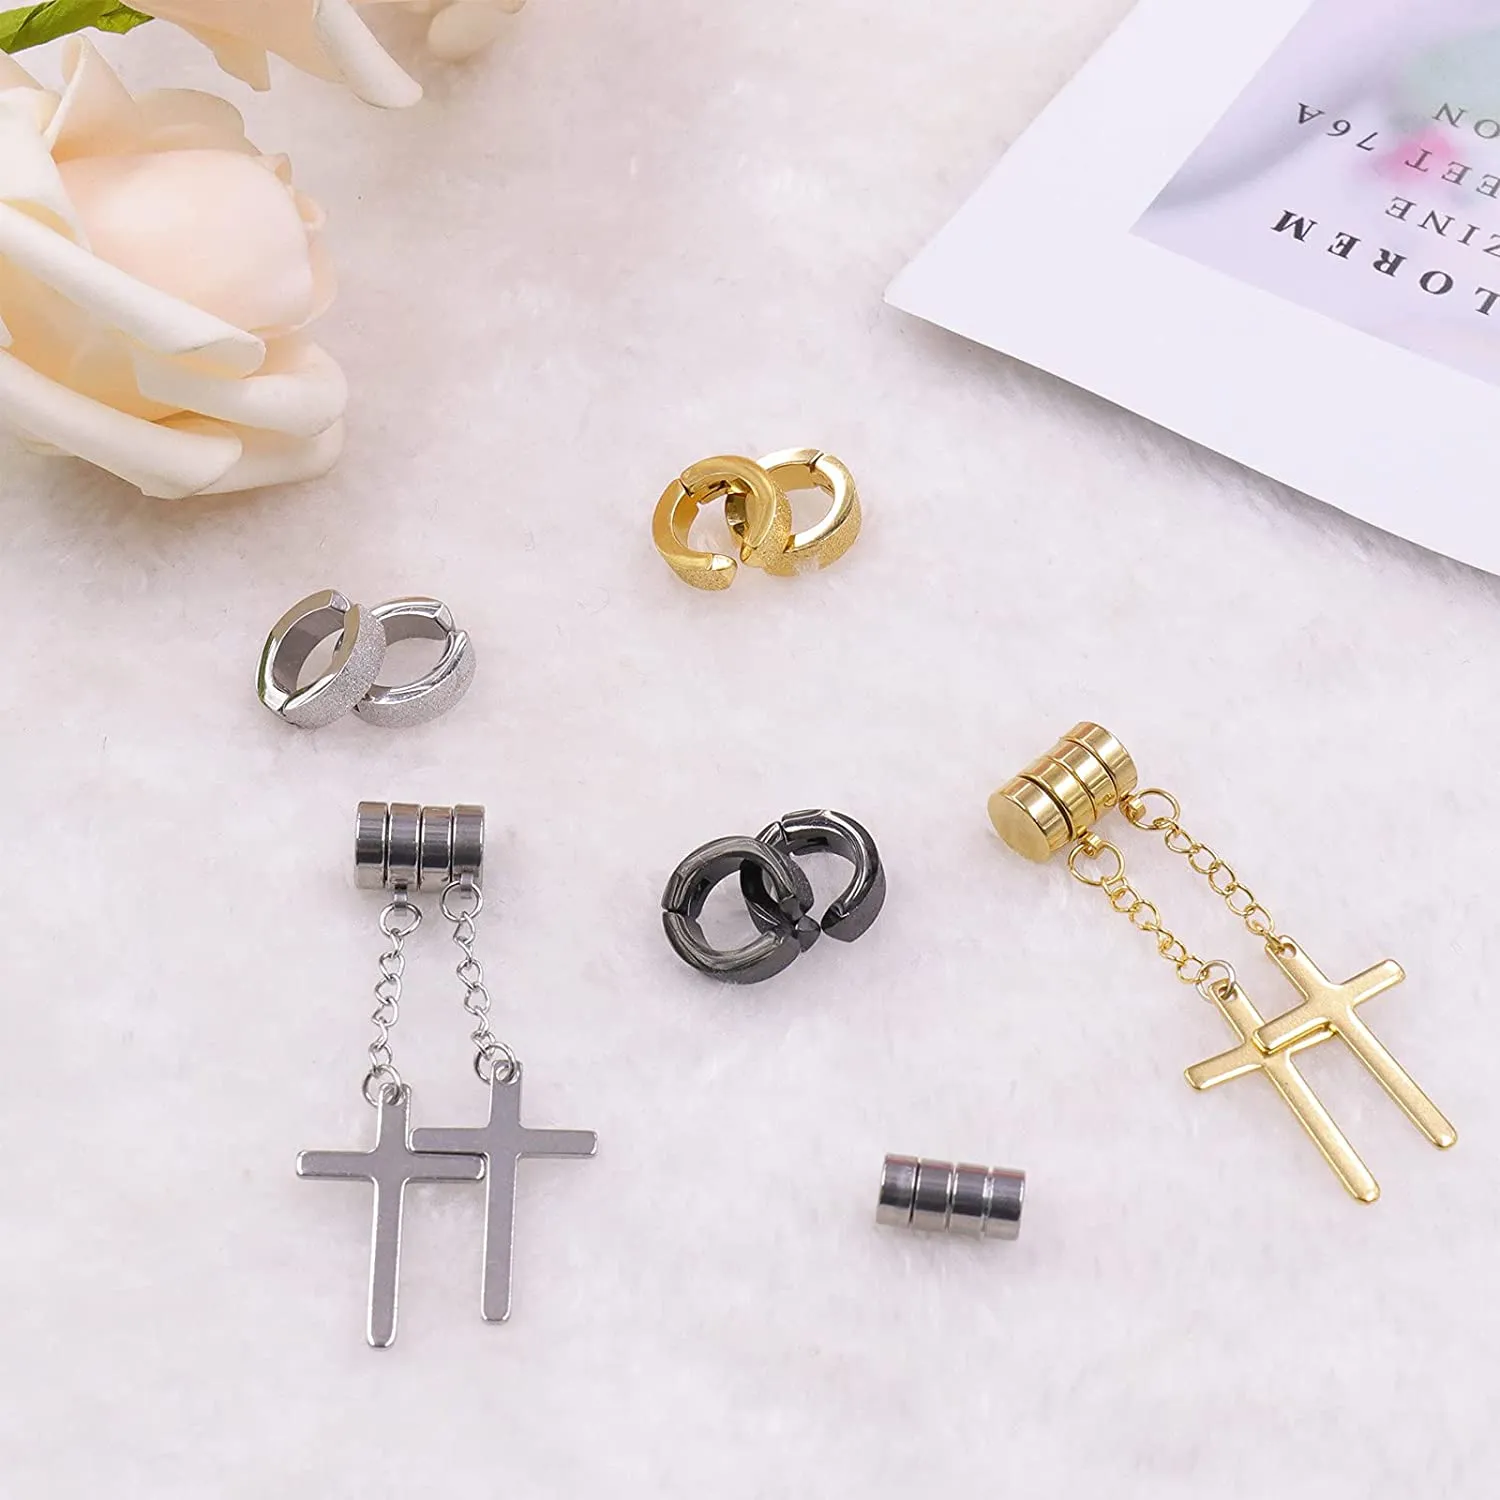 Magnetic Stainless Steel Stud Earrings For Men And Women Clip On, Hinged,  Cross Dangling Design With CZ Stones From Lirp, $14.49 | DHgate.Com